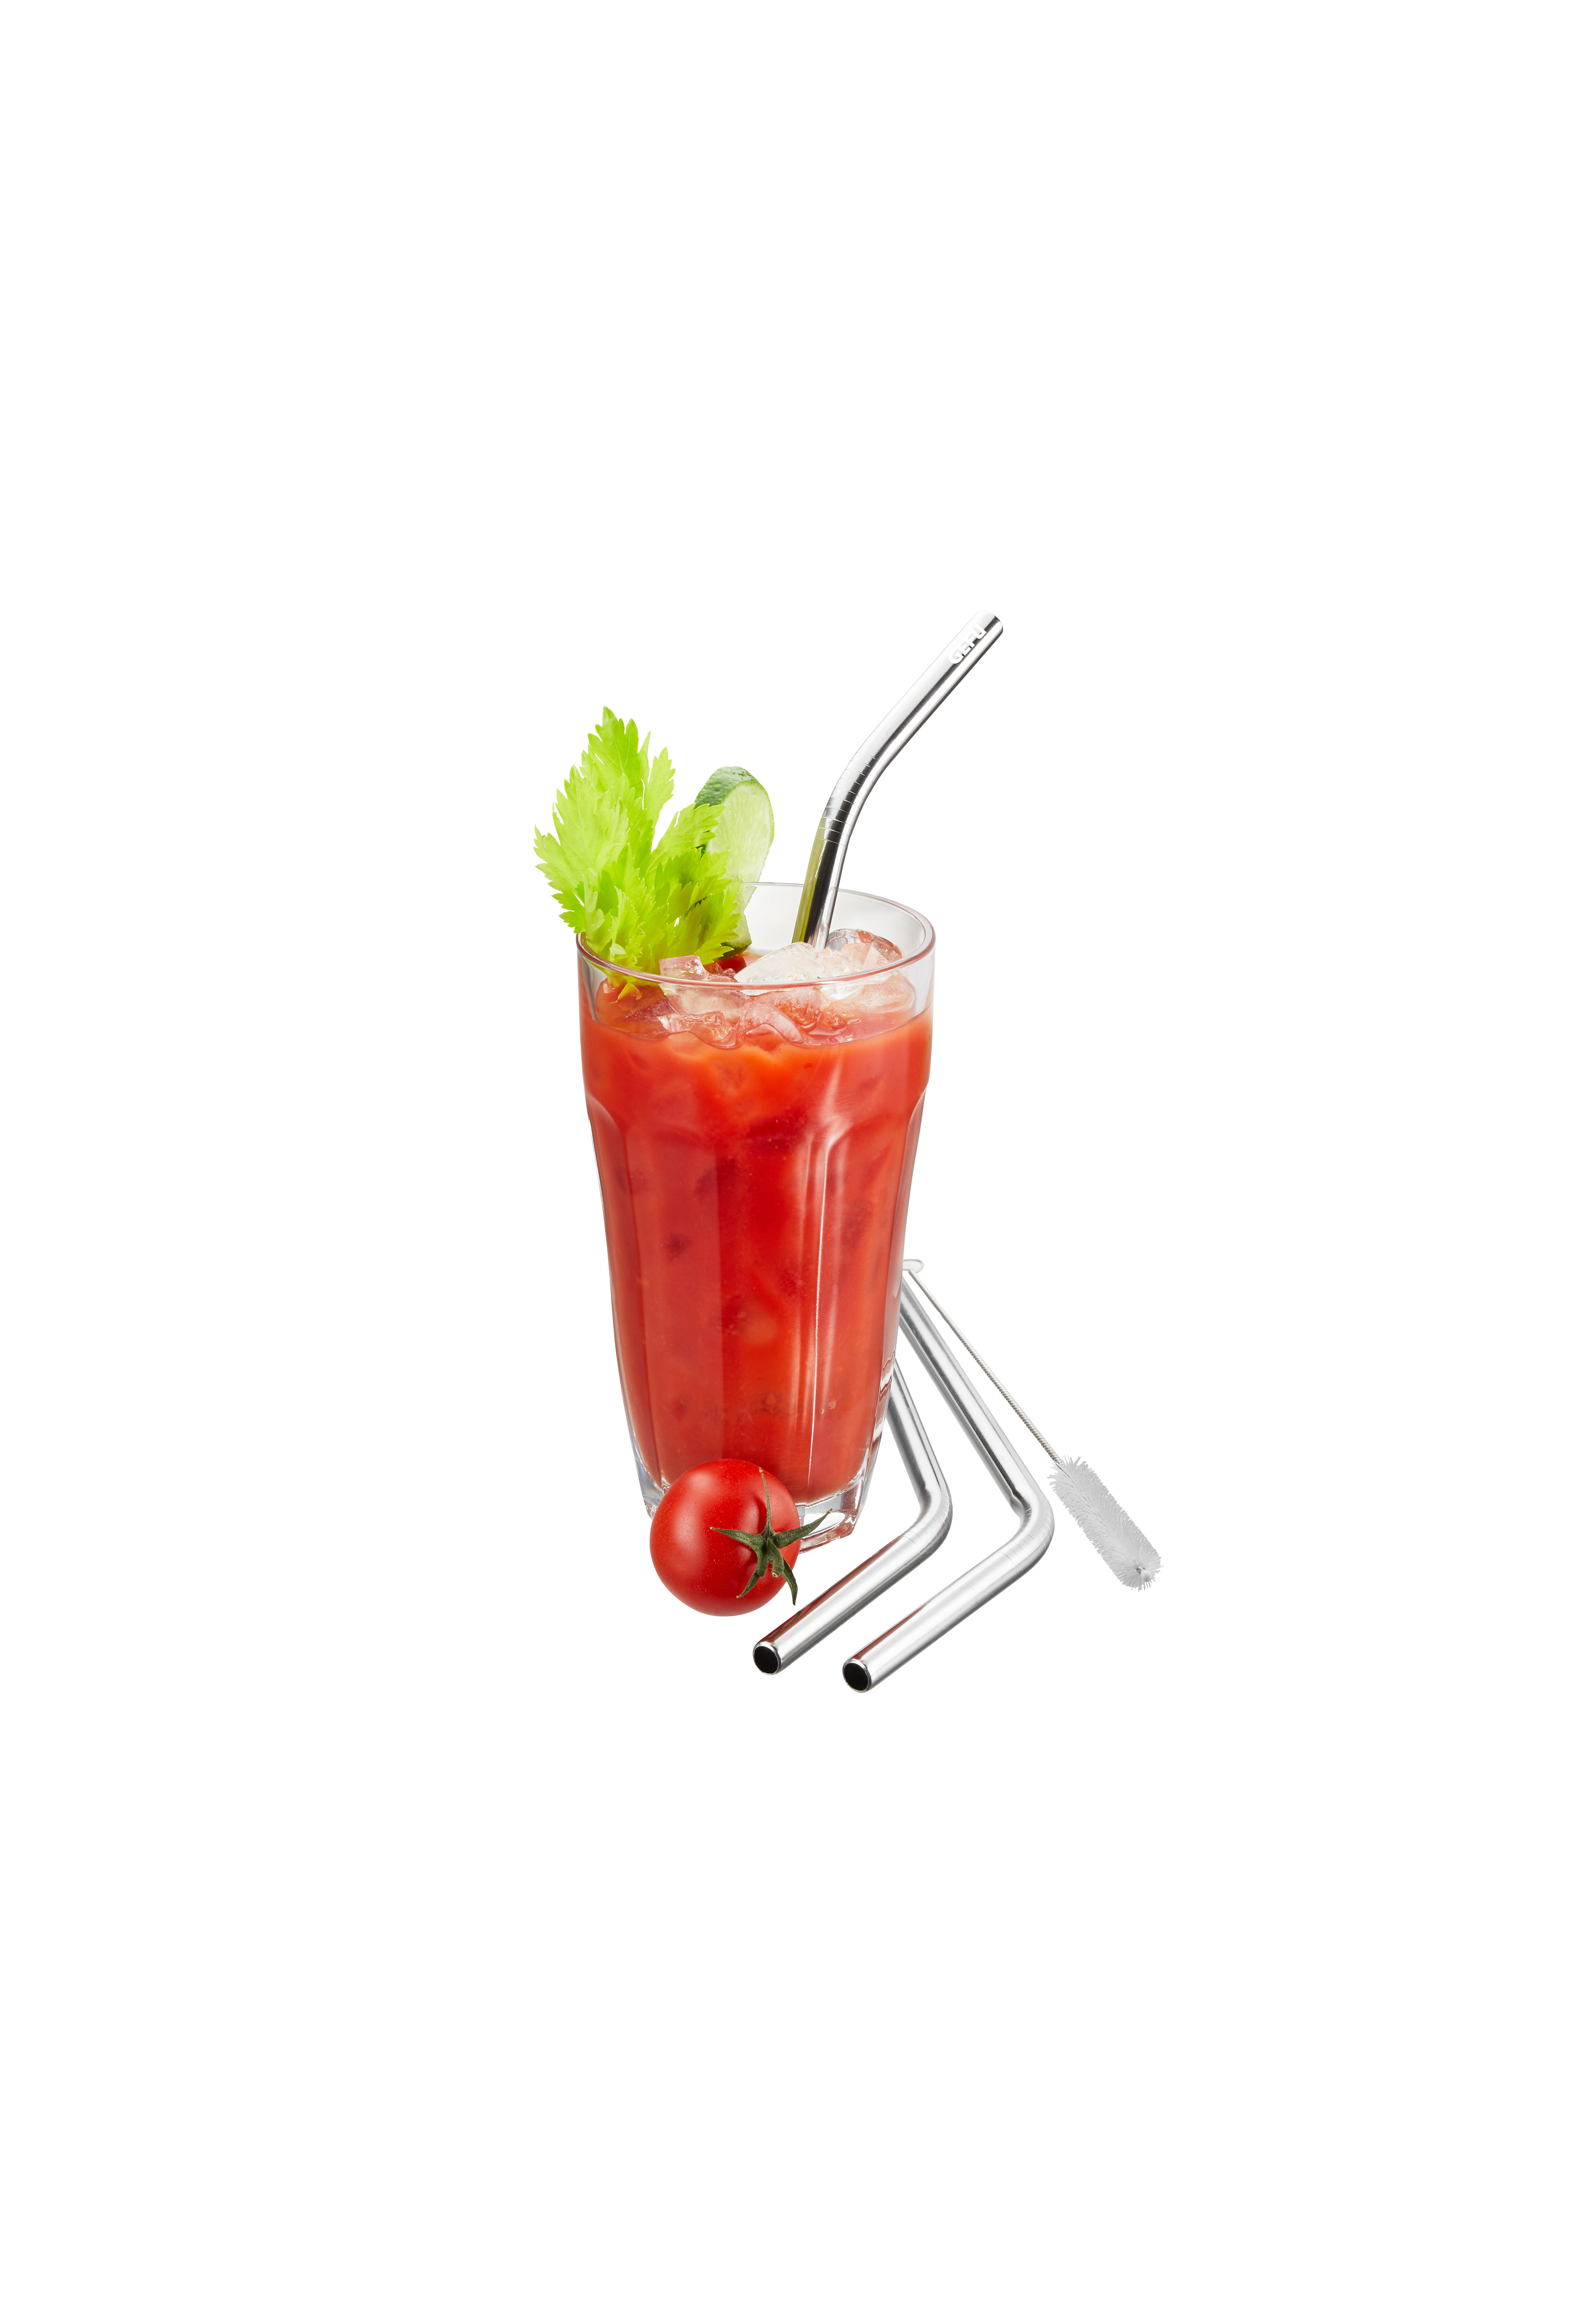 Stainless Steel Straw FUTURE, 23 cm, 4 pcs.